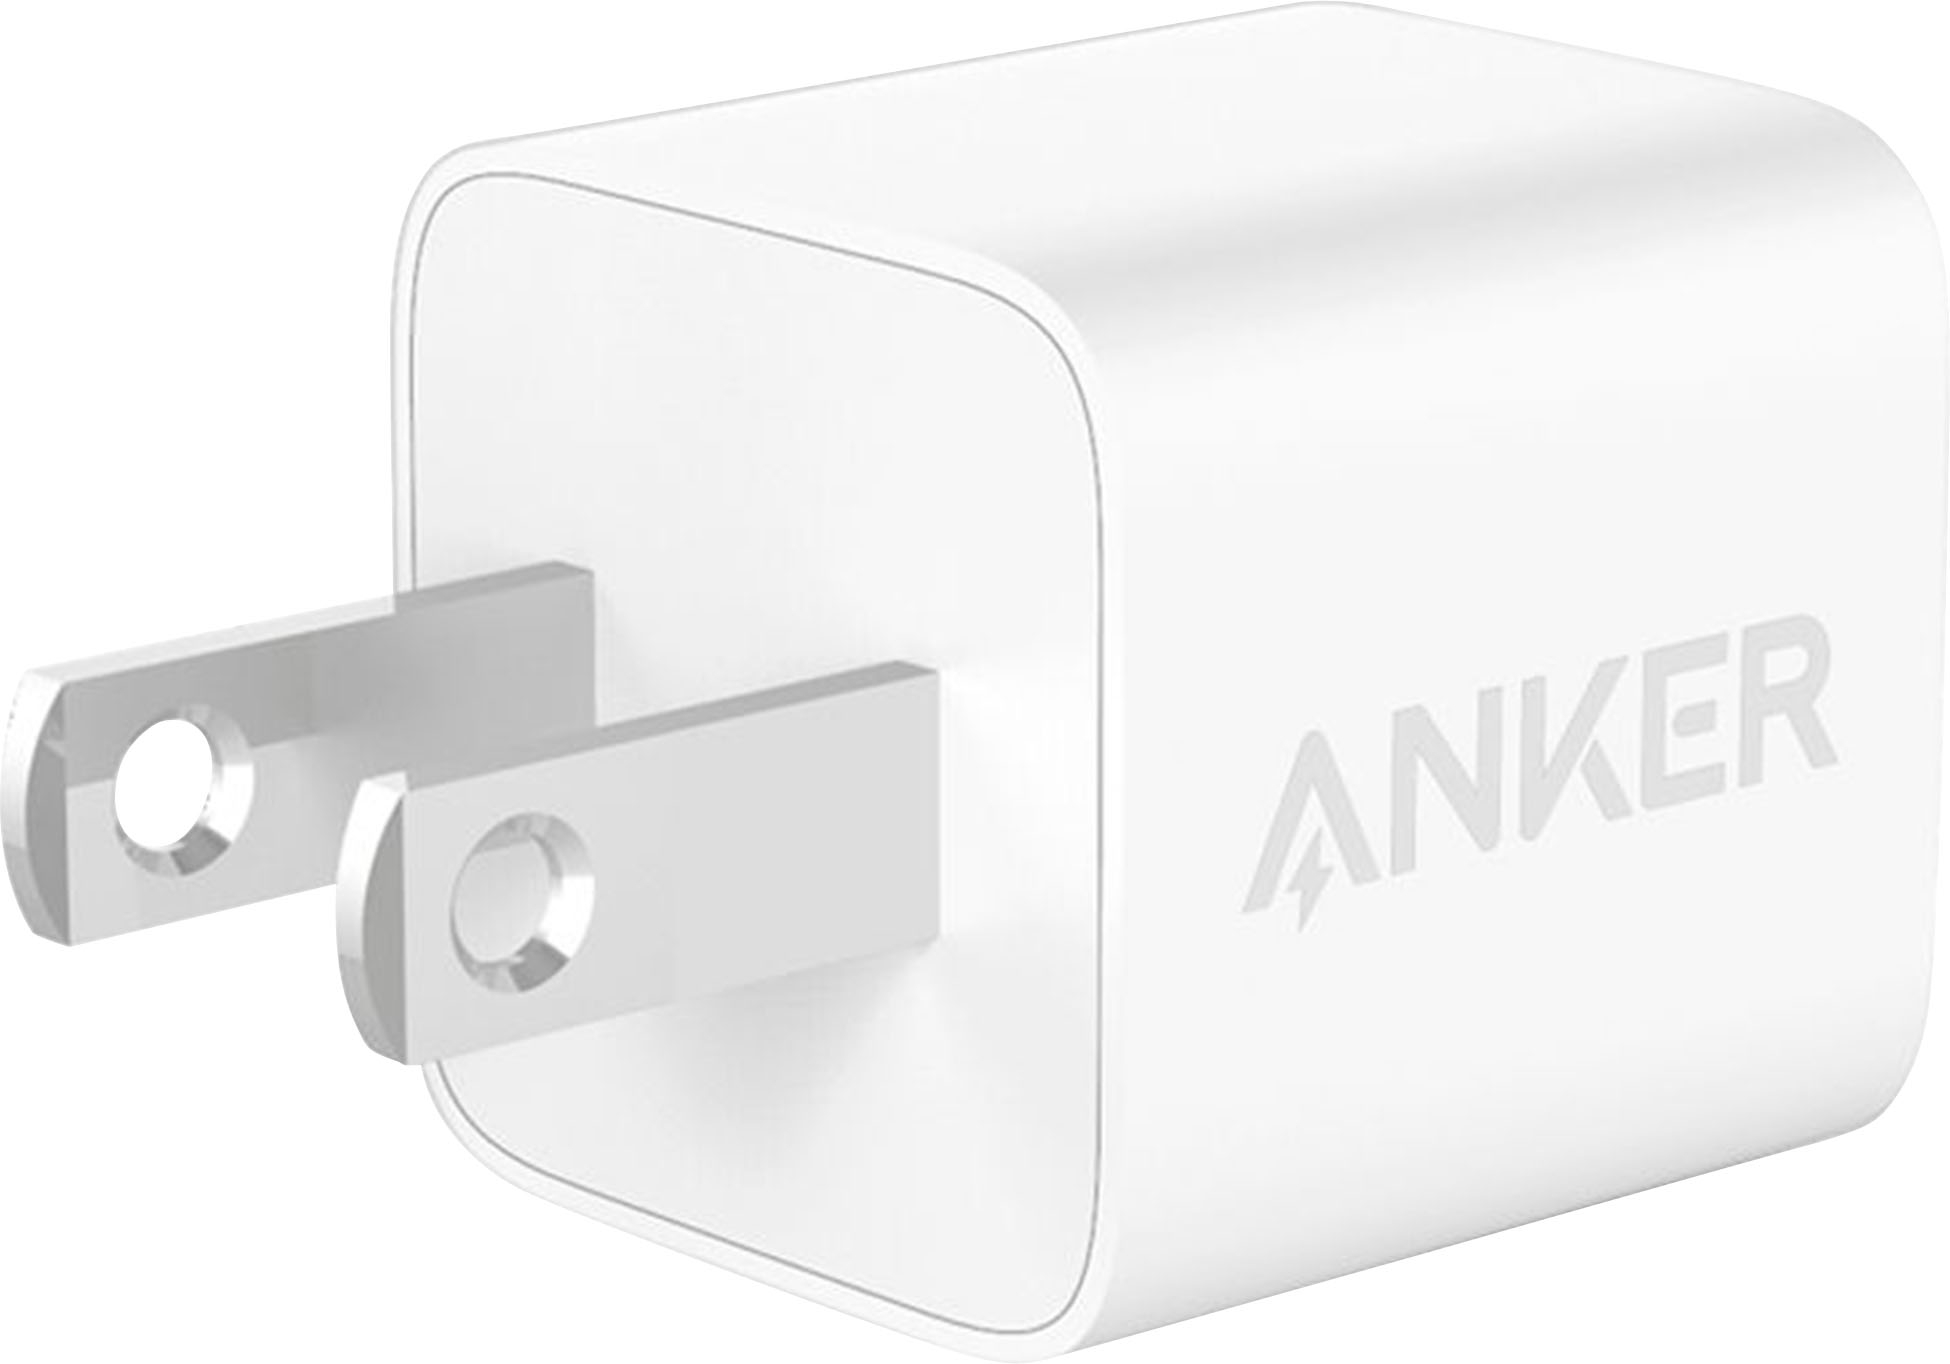  USB C Charger Block 20W, Anker 511 Charger (Nano Pro